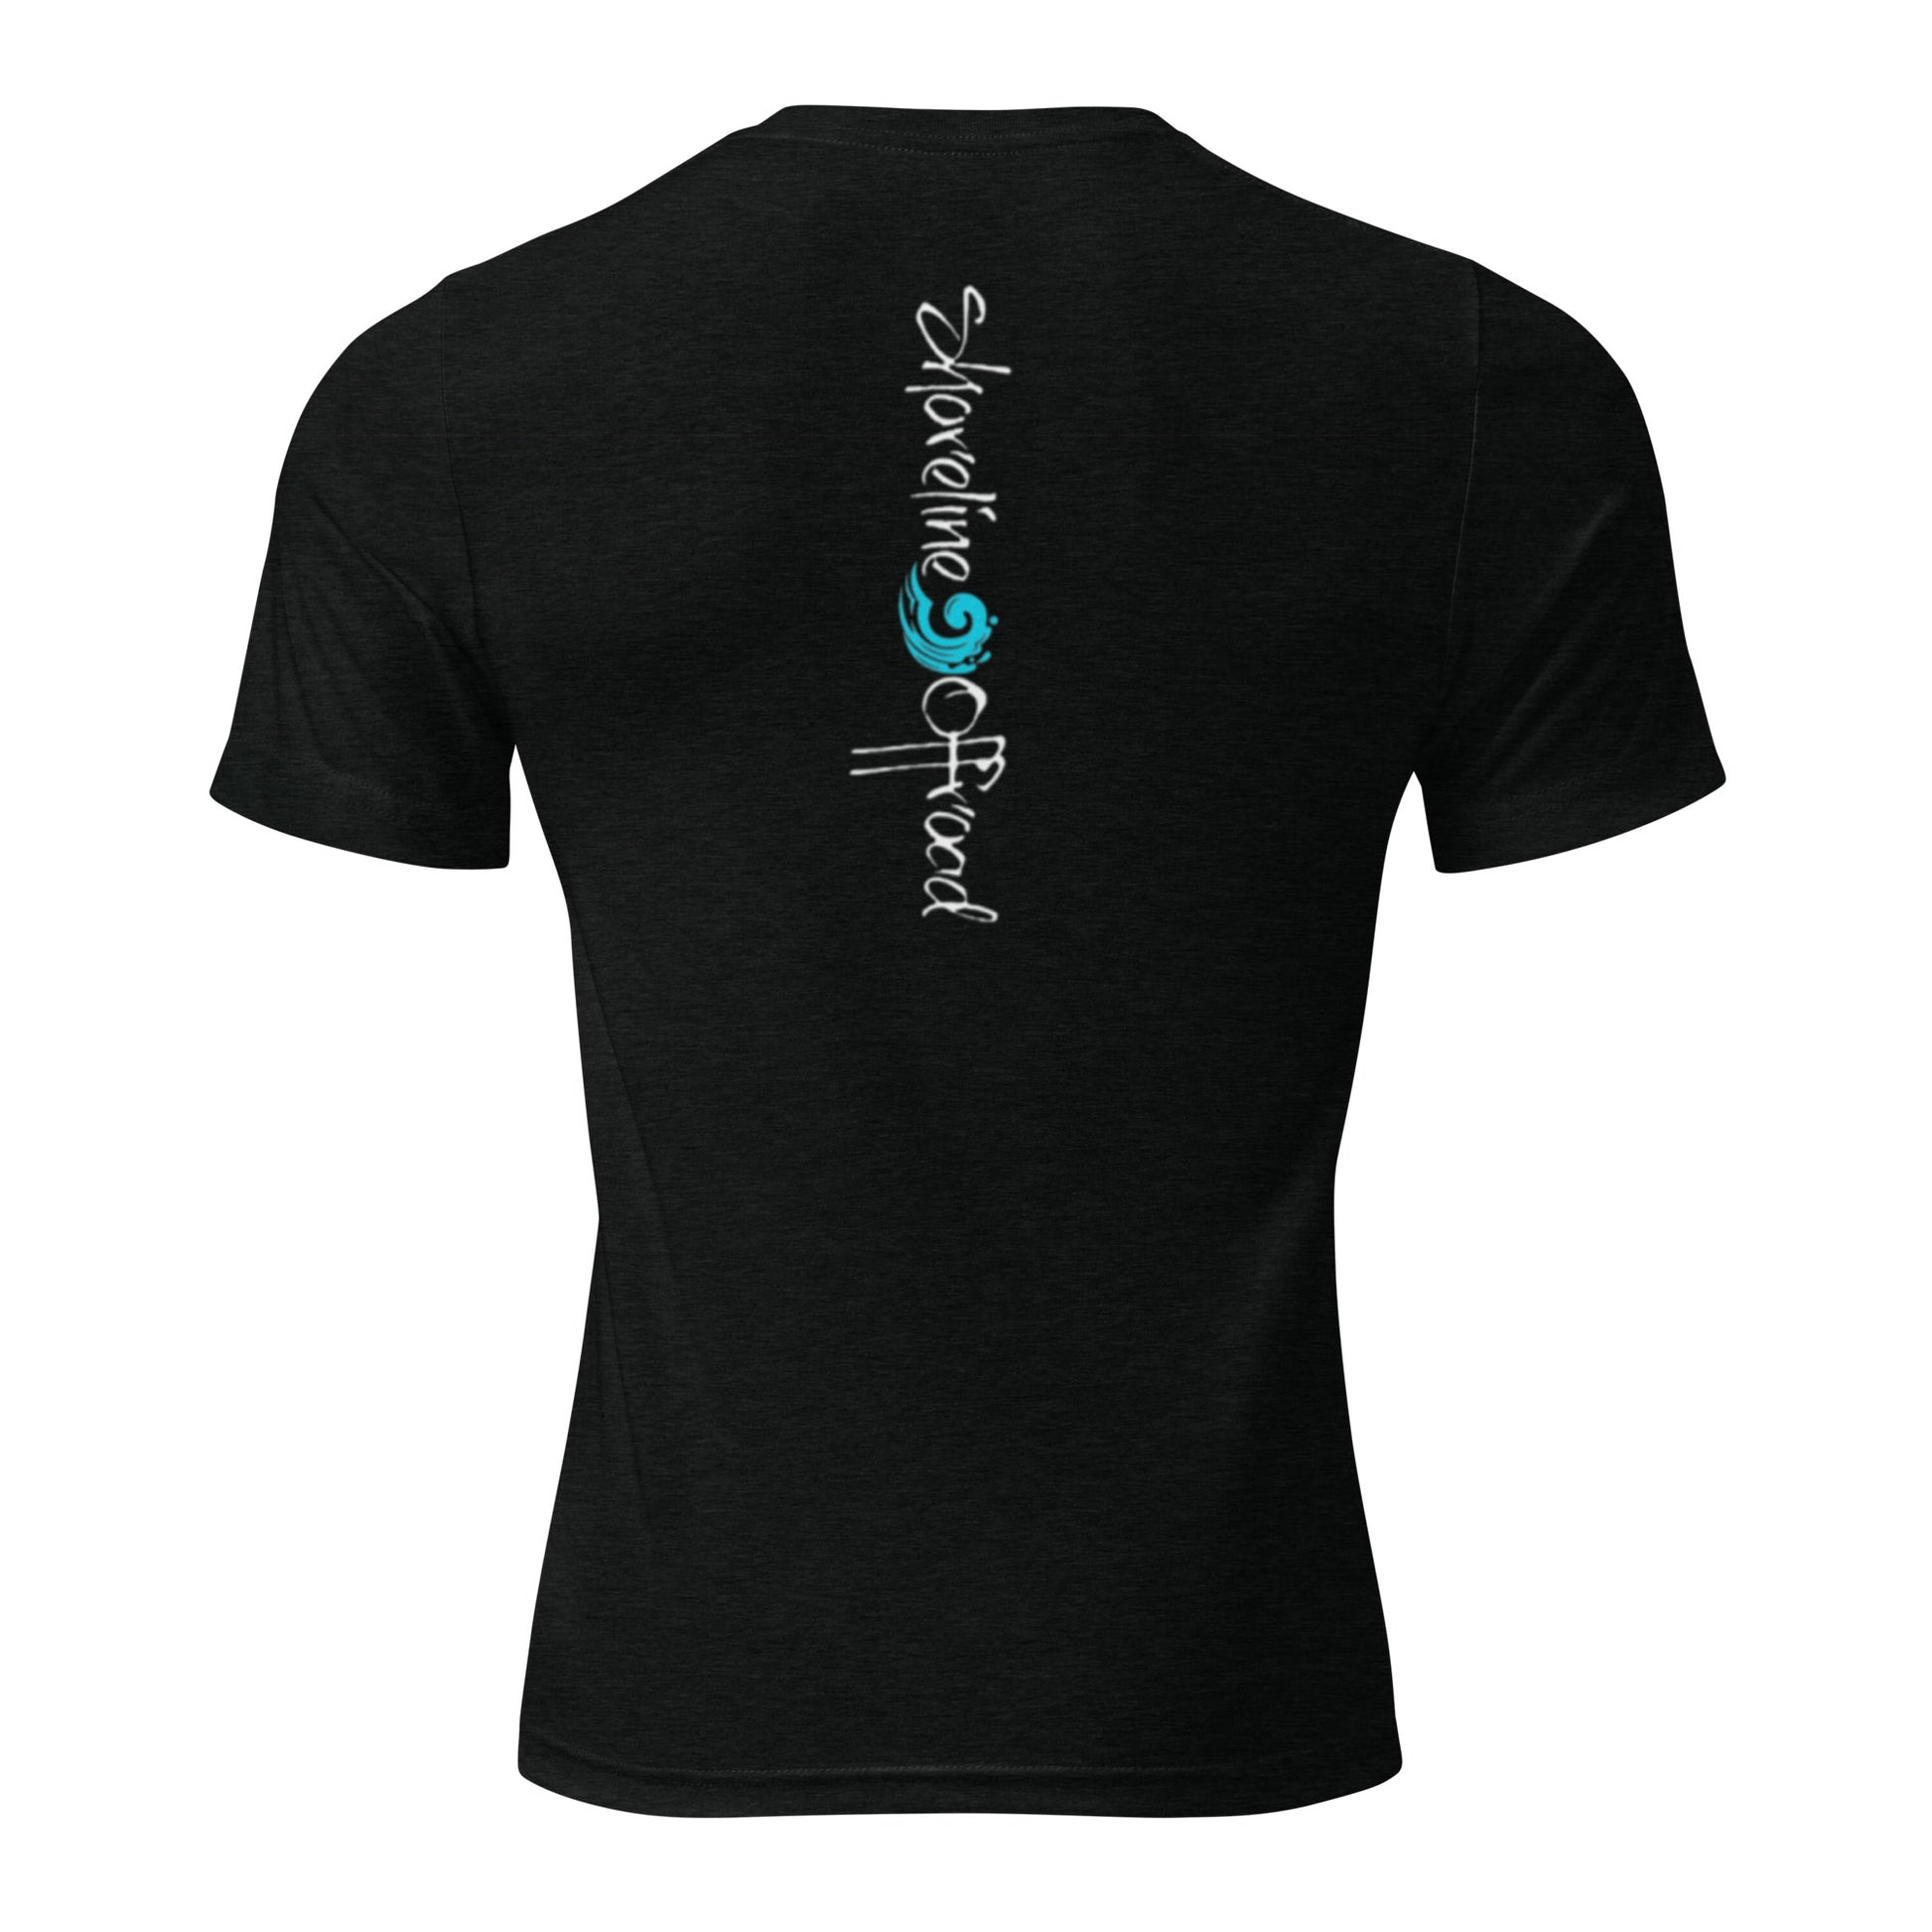 the back of a black shirt with a blue and green logo